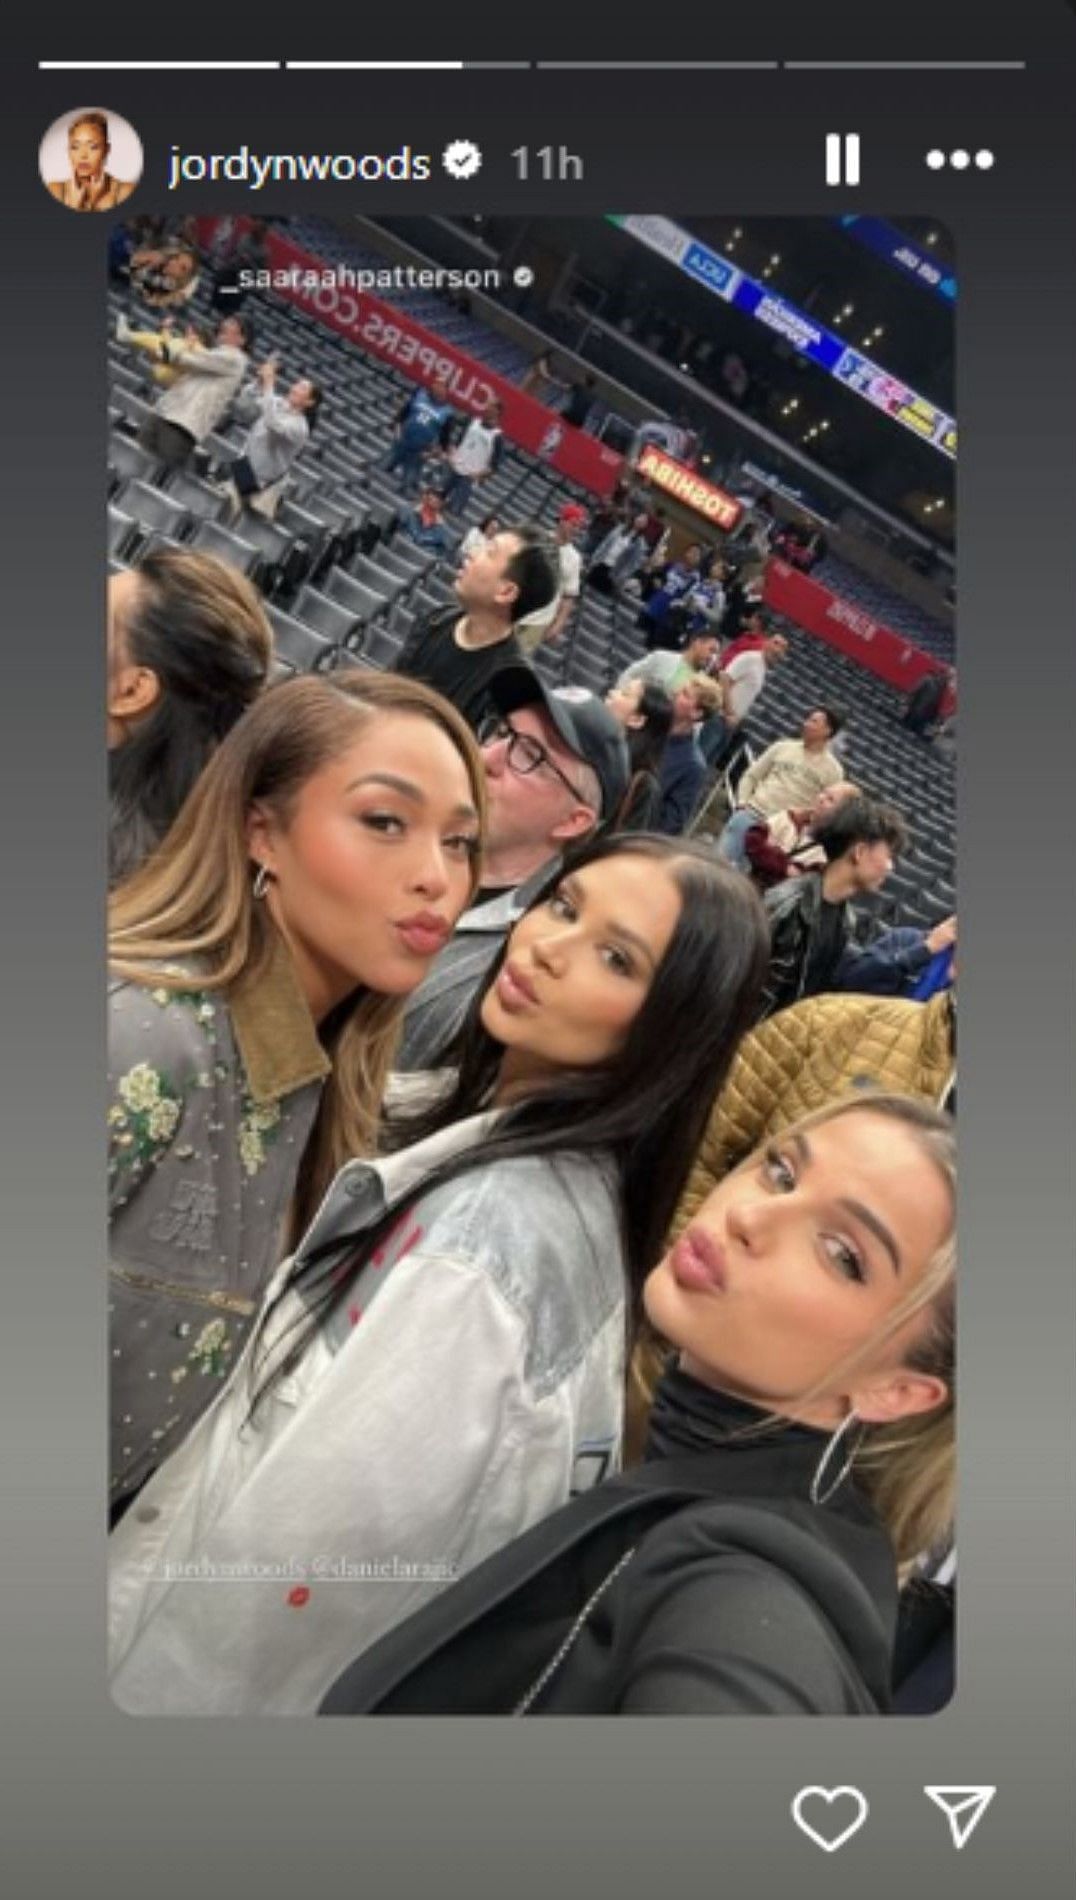 Jordyn Woods (left) snaps a photo with Daniela Rajic at the Minnesota Timberwolves-LA Clippers game on Tuesday.